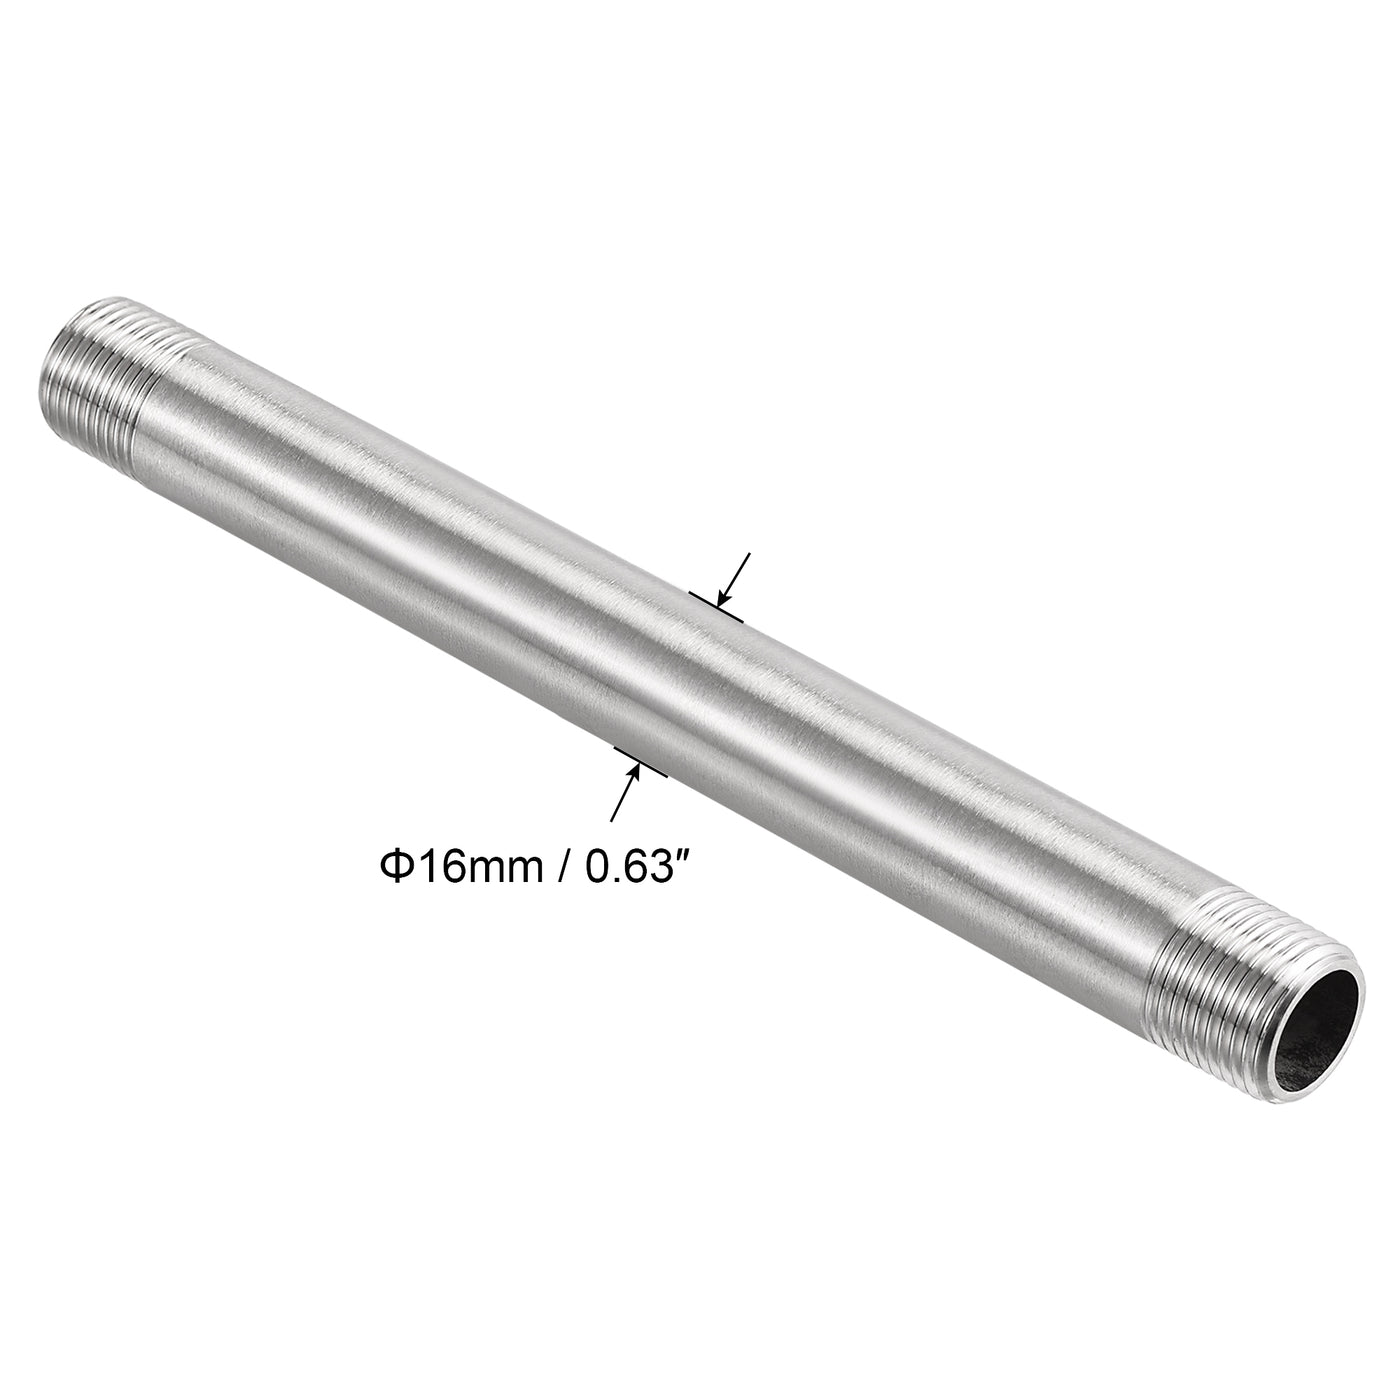 Uxcell Uxcell 304 Stainless Steel Pipe Fitting G3/8 Male Thread 200mm Length Coupler for Extending Pipes